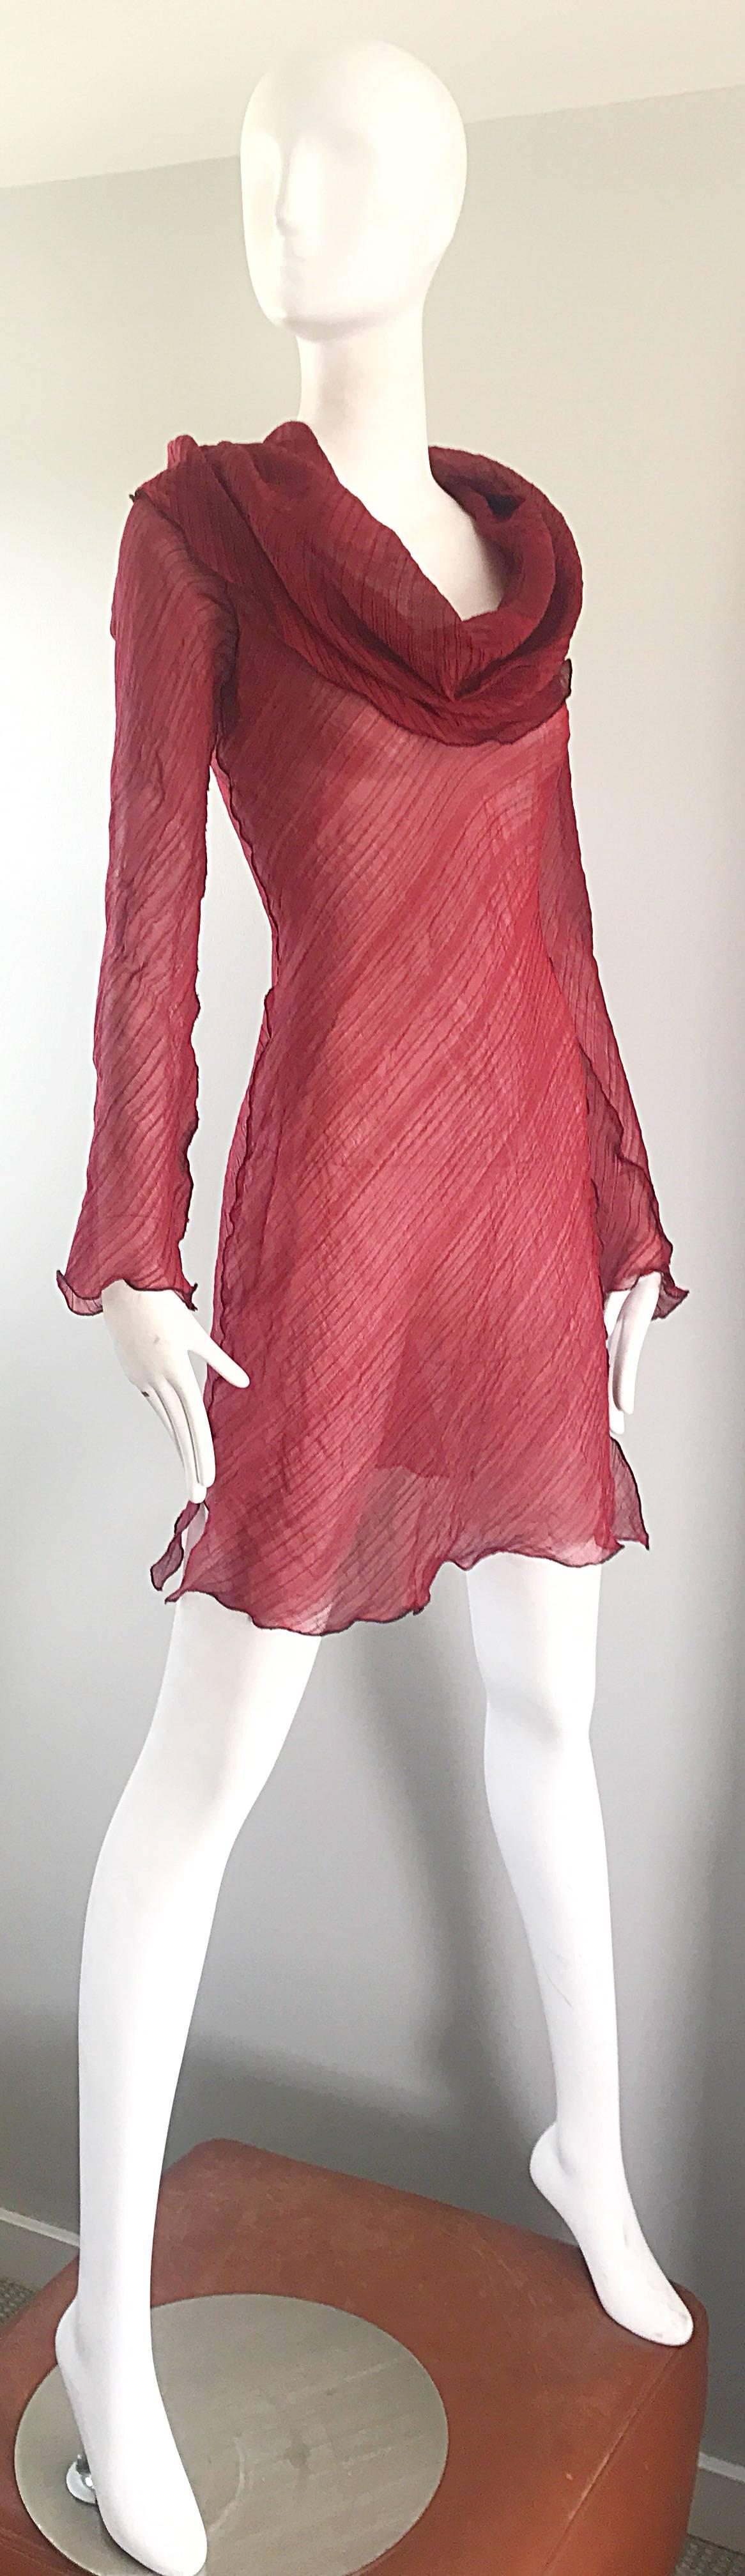 Cari Borja Red Semi Sheer Cowl Neck Silk / Rayon Tunic Dress  In Excellent Condition For Sale In San Diego, CA